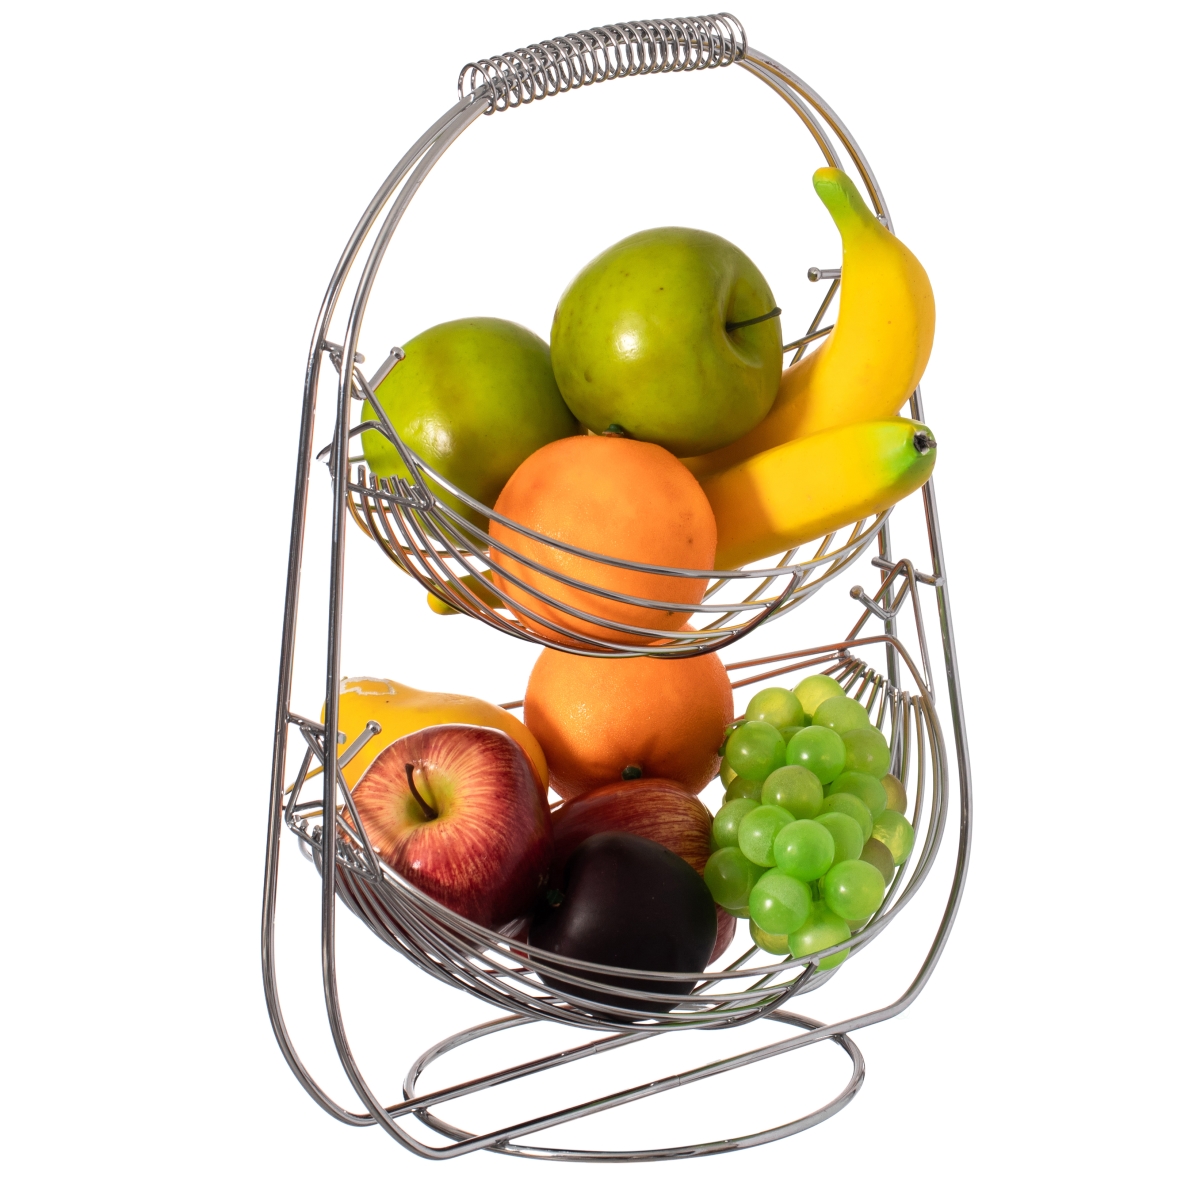 Picture of Basicwise QI004474 2 Tier Metal Fruit Holder Swing Basket for Kitchen | Detachable Countertop Vegetables Storage Organizer with Display Hammock Stand for Farmhouse, Living Room, Dining Room